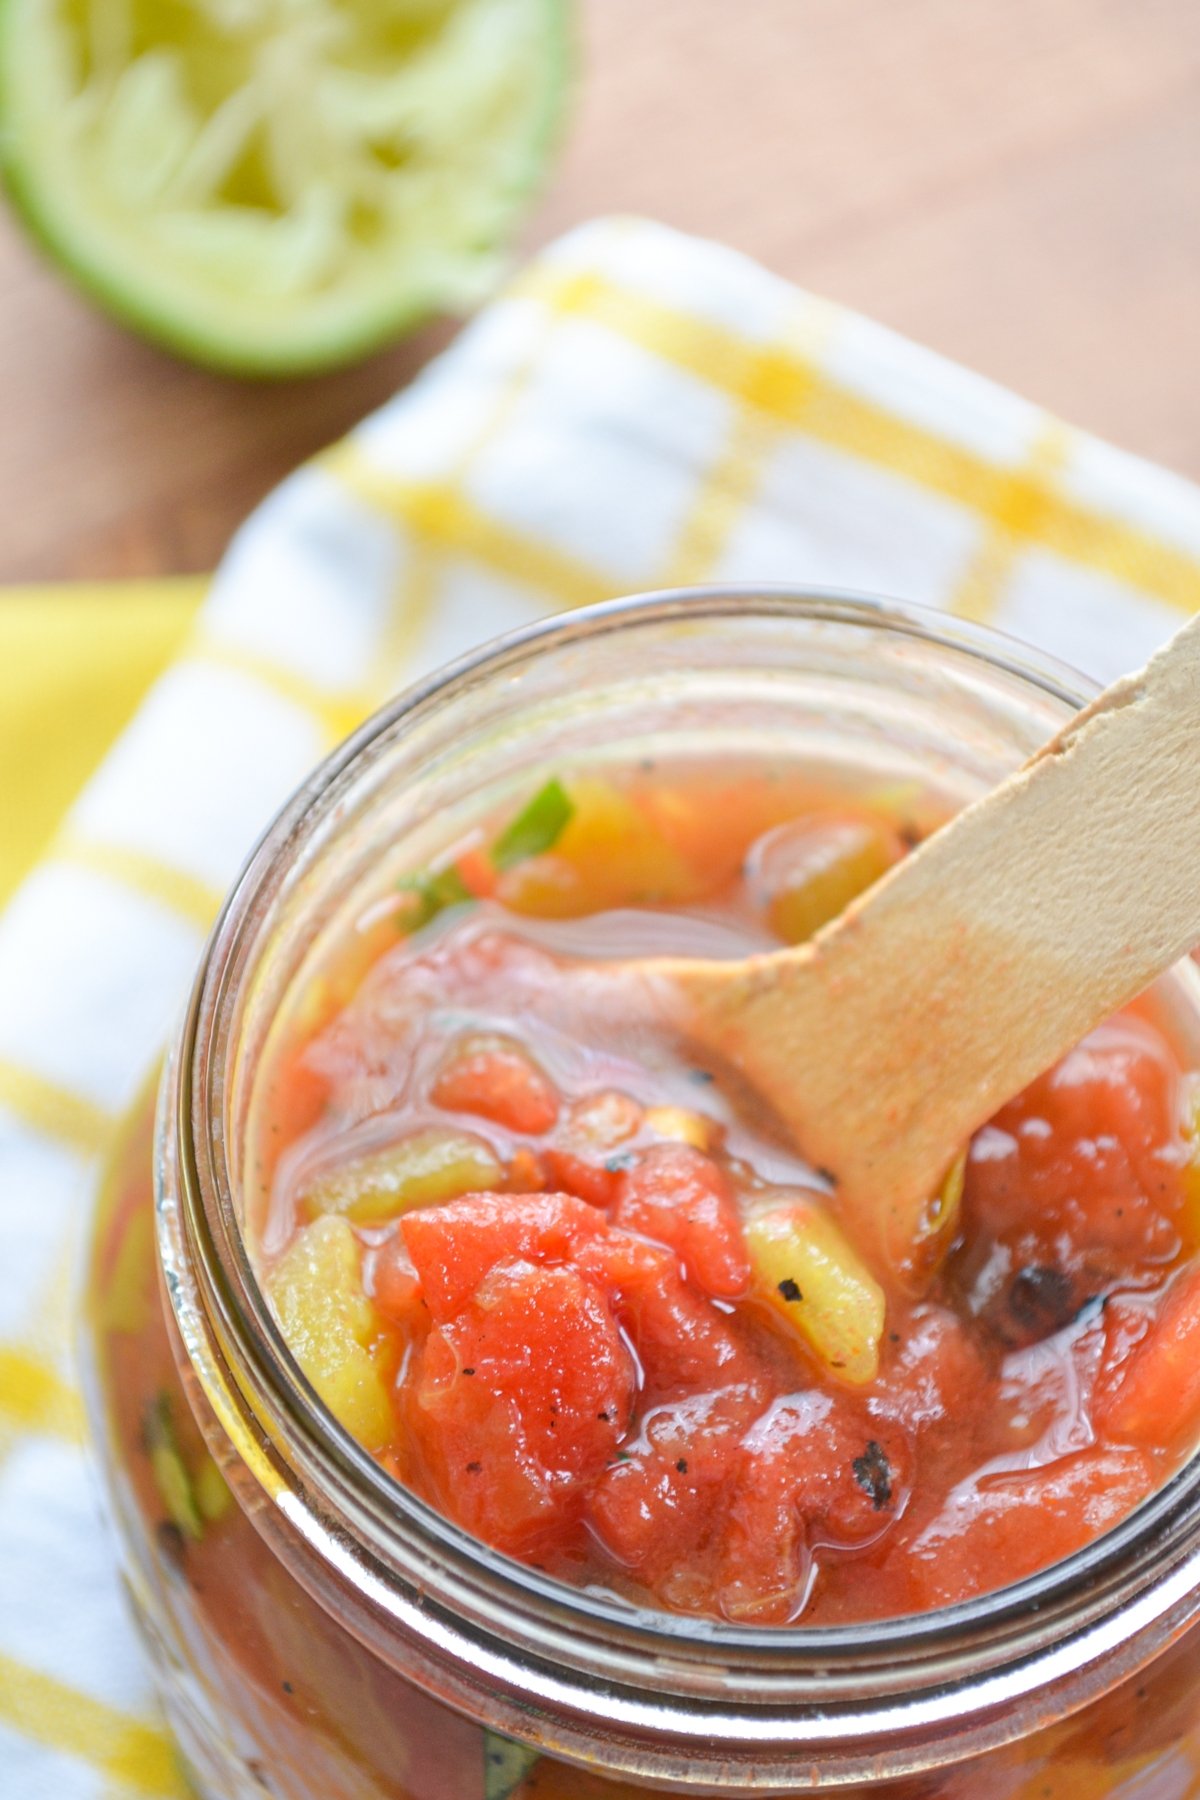 A homemade substitute for Rotel tomatoes and chilies in a glass jar.